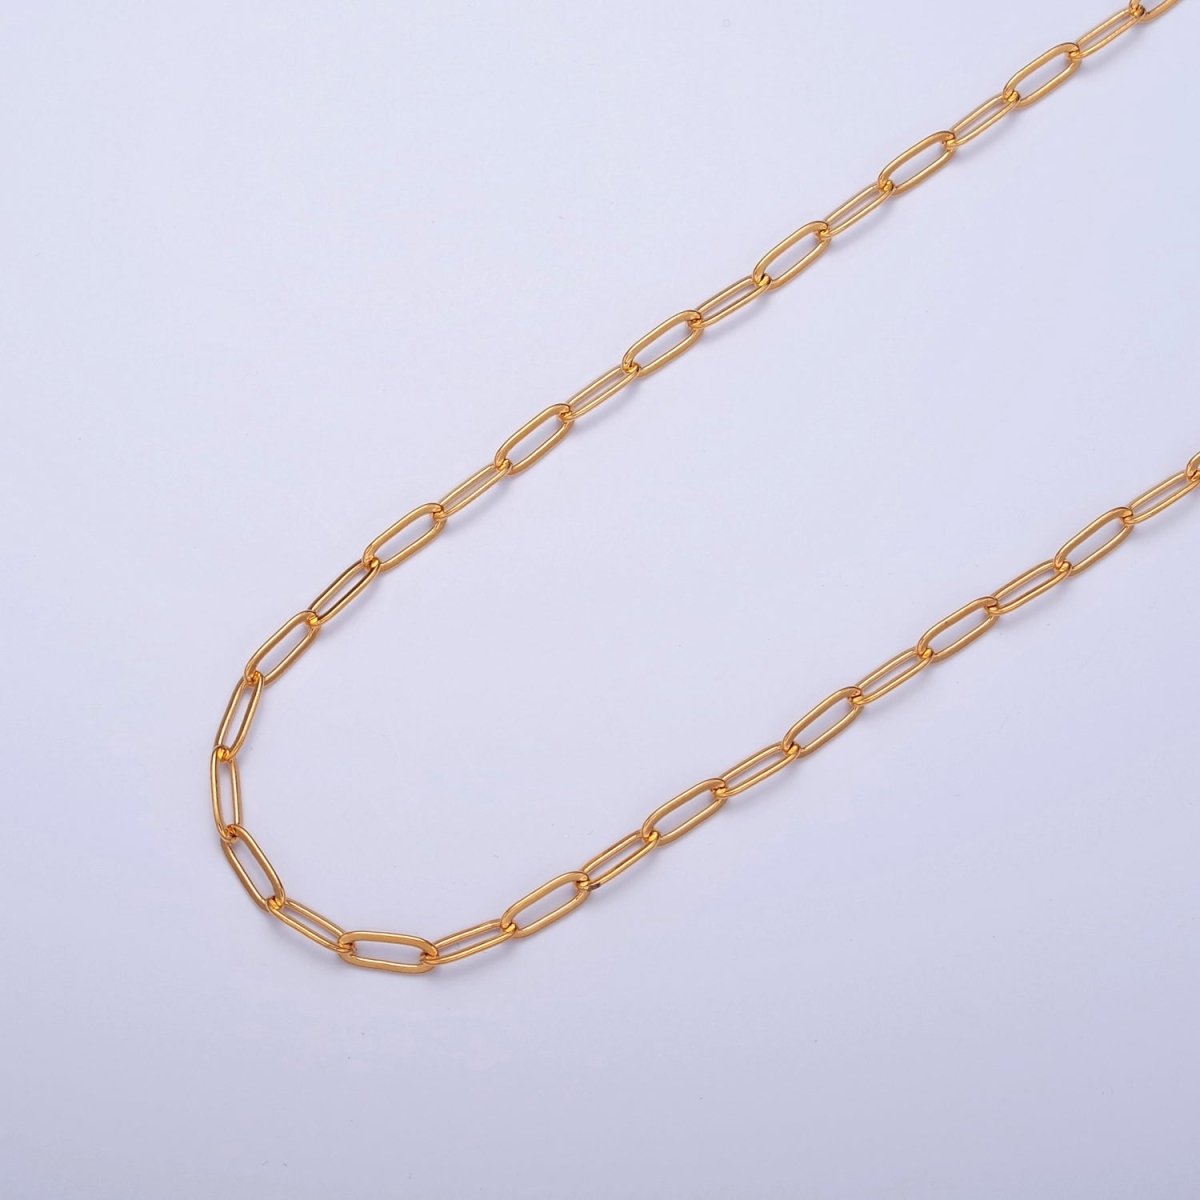 Cable Link Unfinished Chain, 7.3mm x 2.8mm, 24k Gold Filled Chain 19.5 inch long | WA-1383 Clearance Pricing - DLUXCA